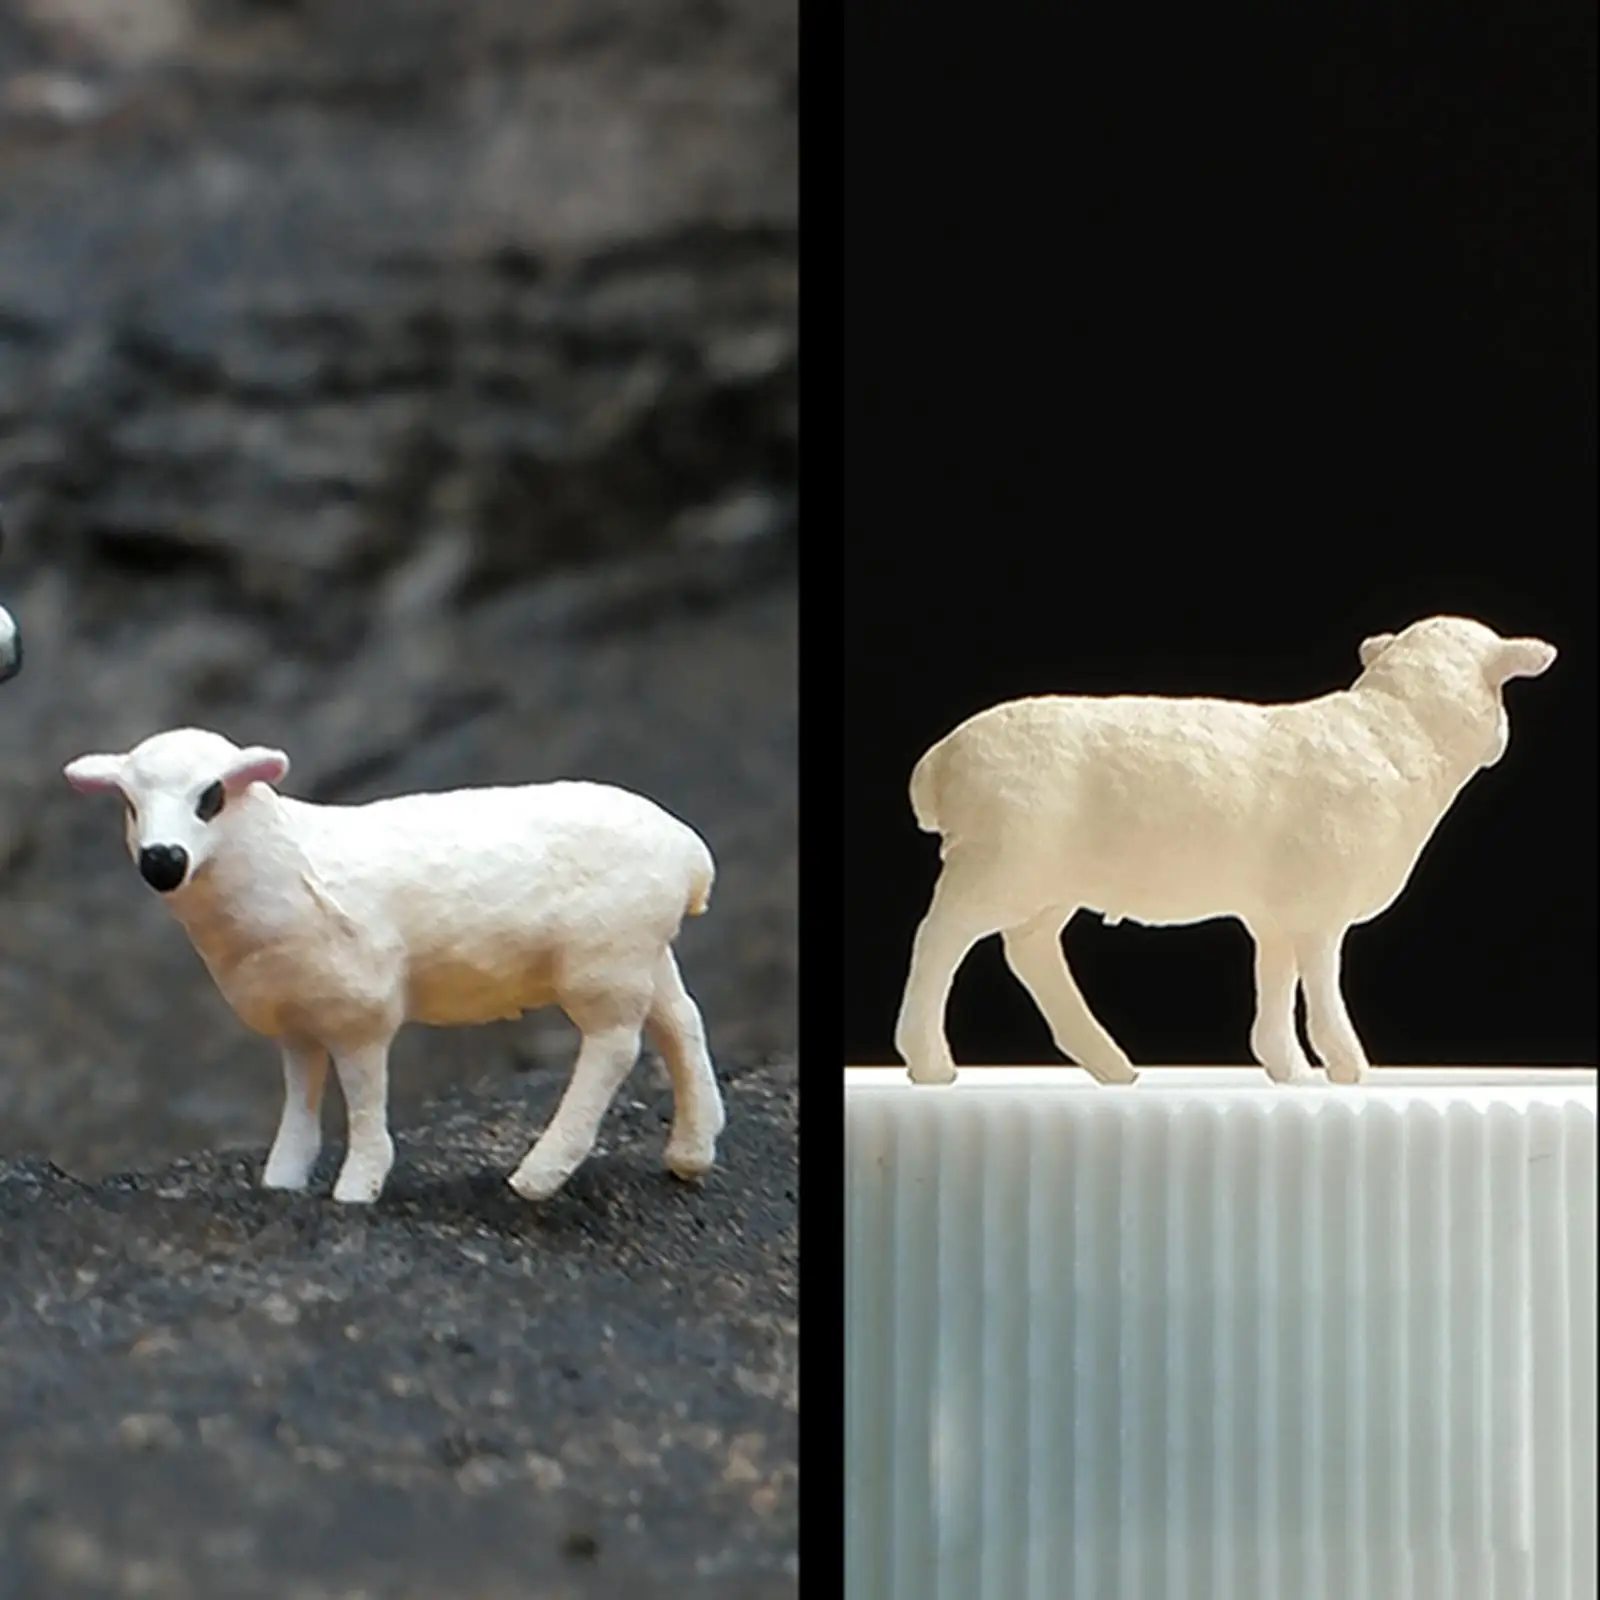 Farm Animals Figure 1/64 Miniature Figures Hand Painted Toy Sheep Figurine Photo Props Miniature Layout DIY Projects Ornament